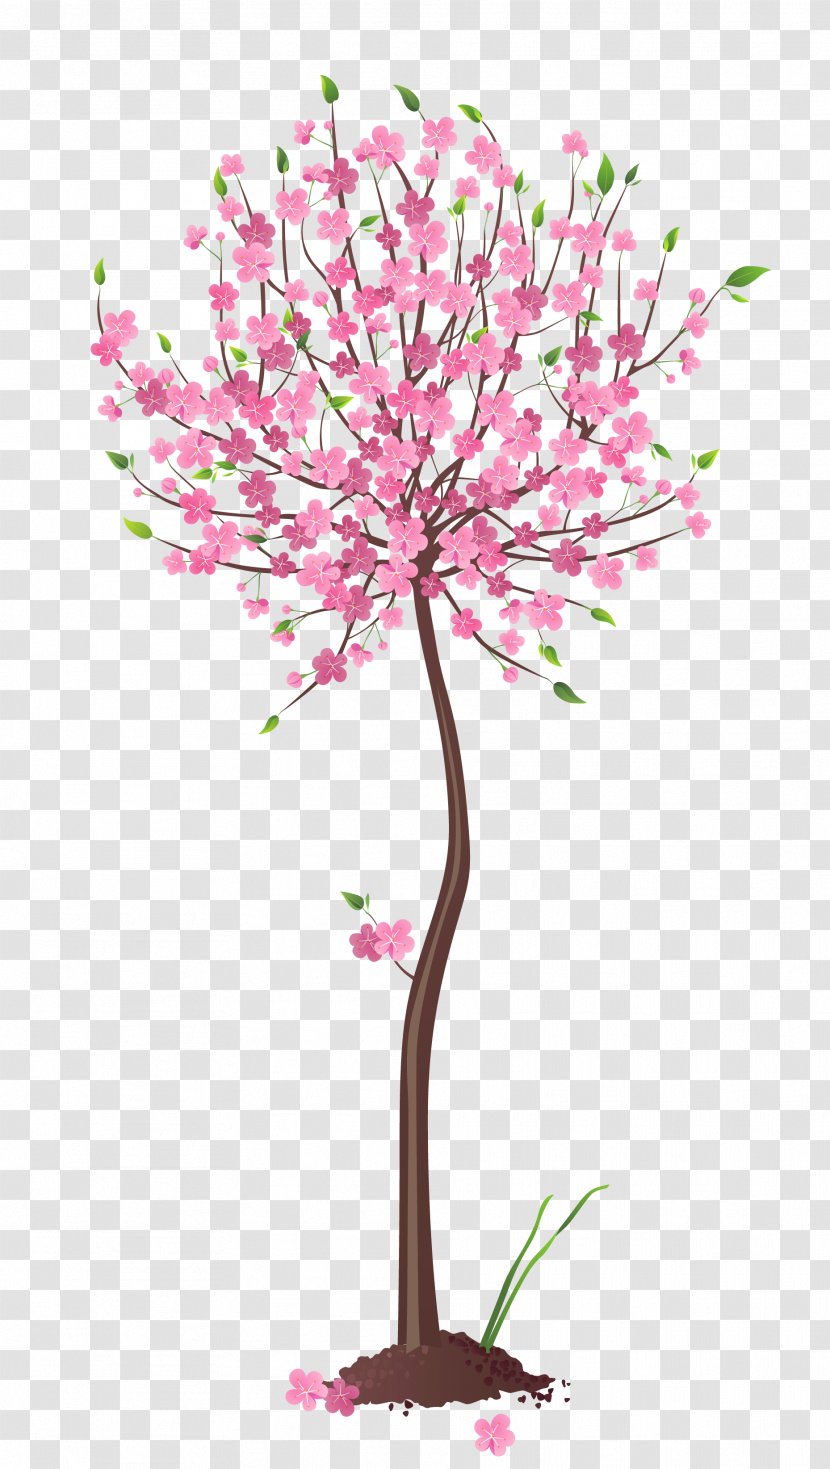 Tree Clip Art - Flowering Plant - Spring Trees Cliparts Transparent PNG